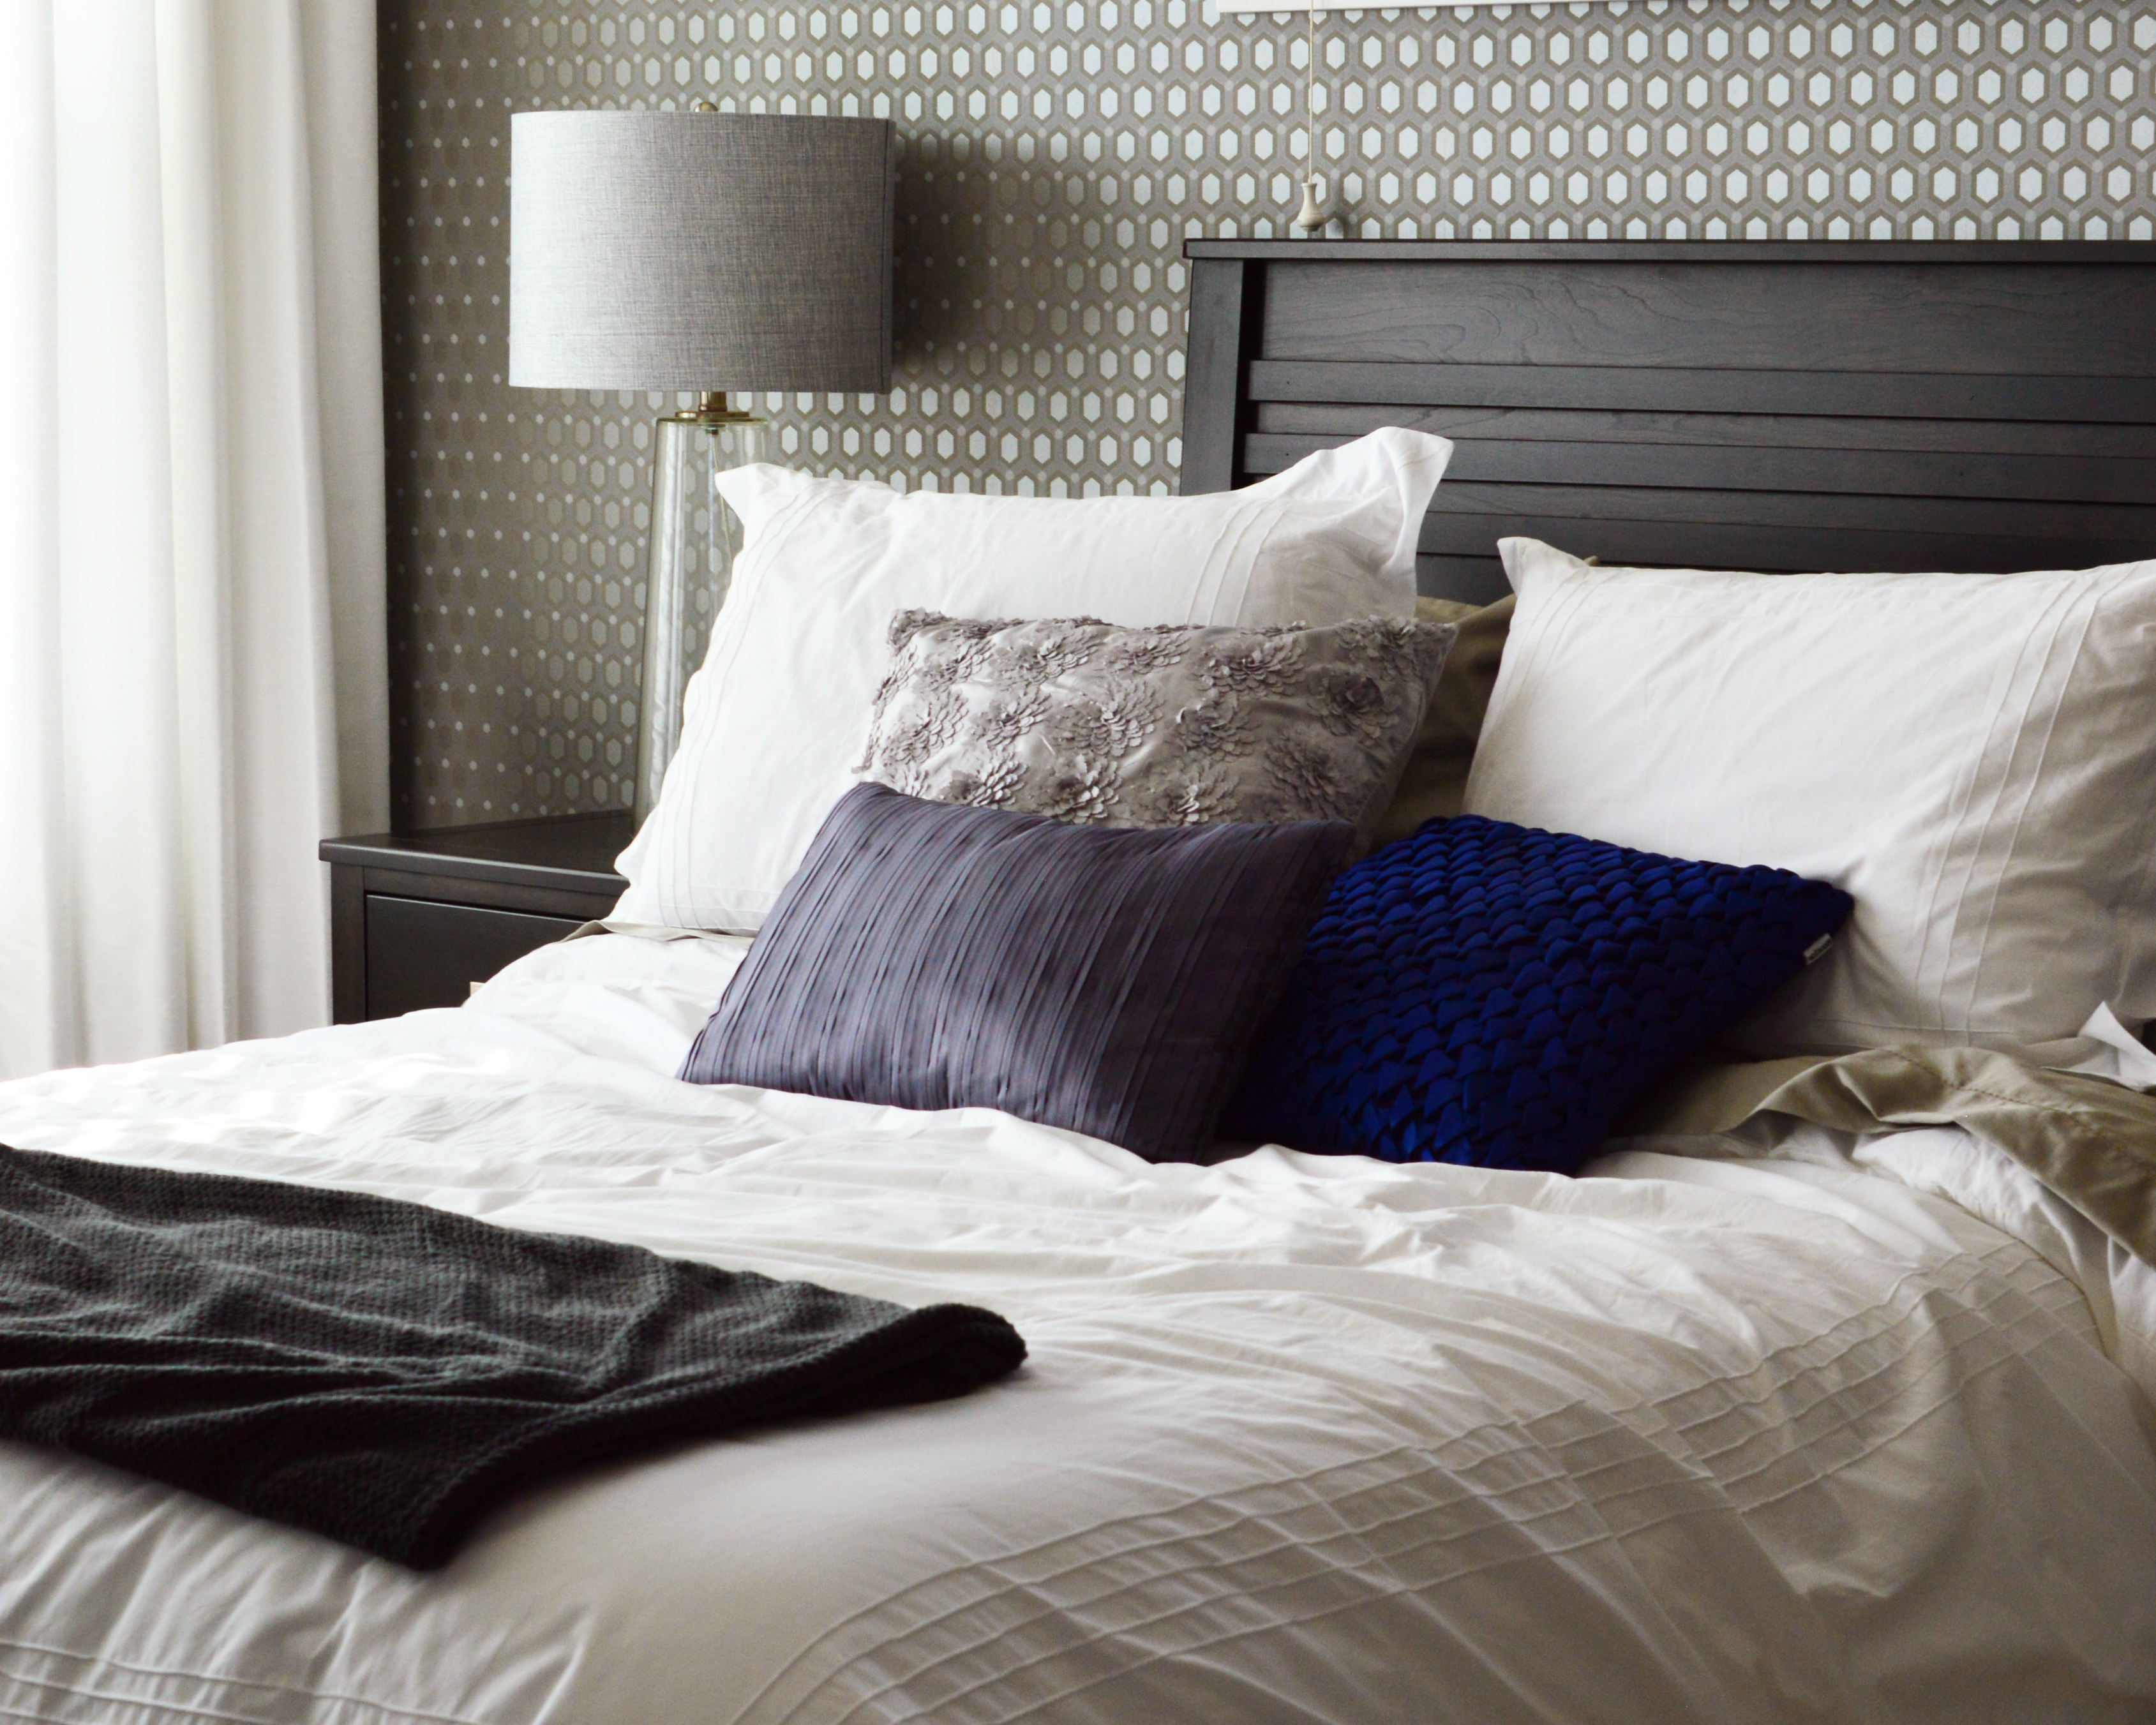 7 Quick And Easy Ways To Update Your Bedroom